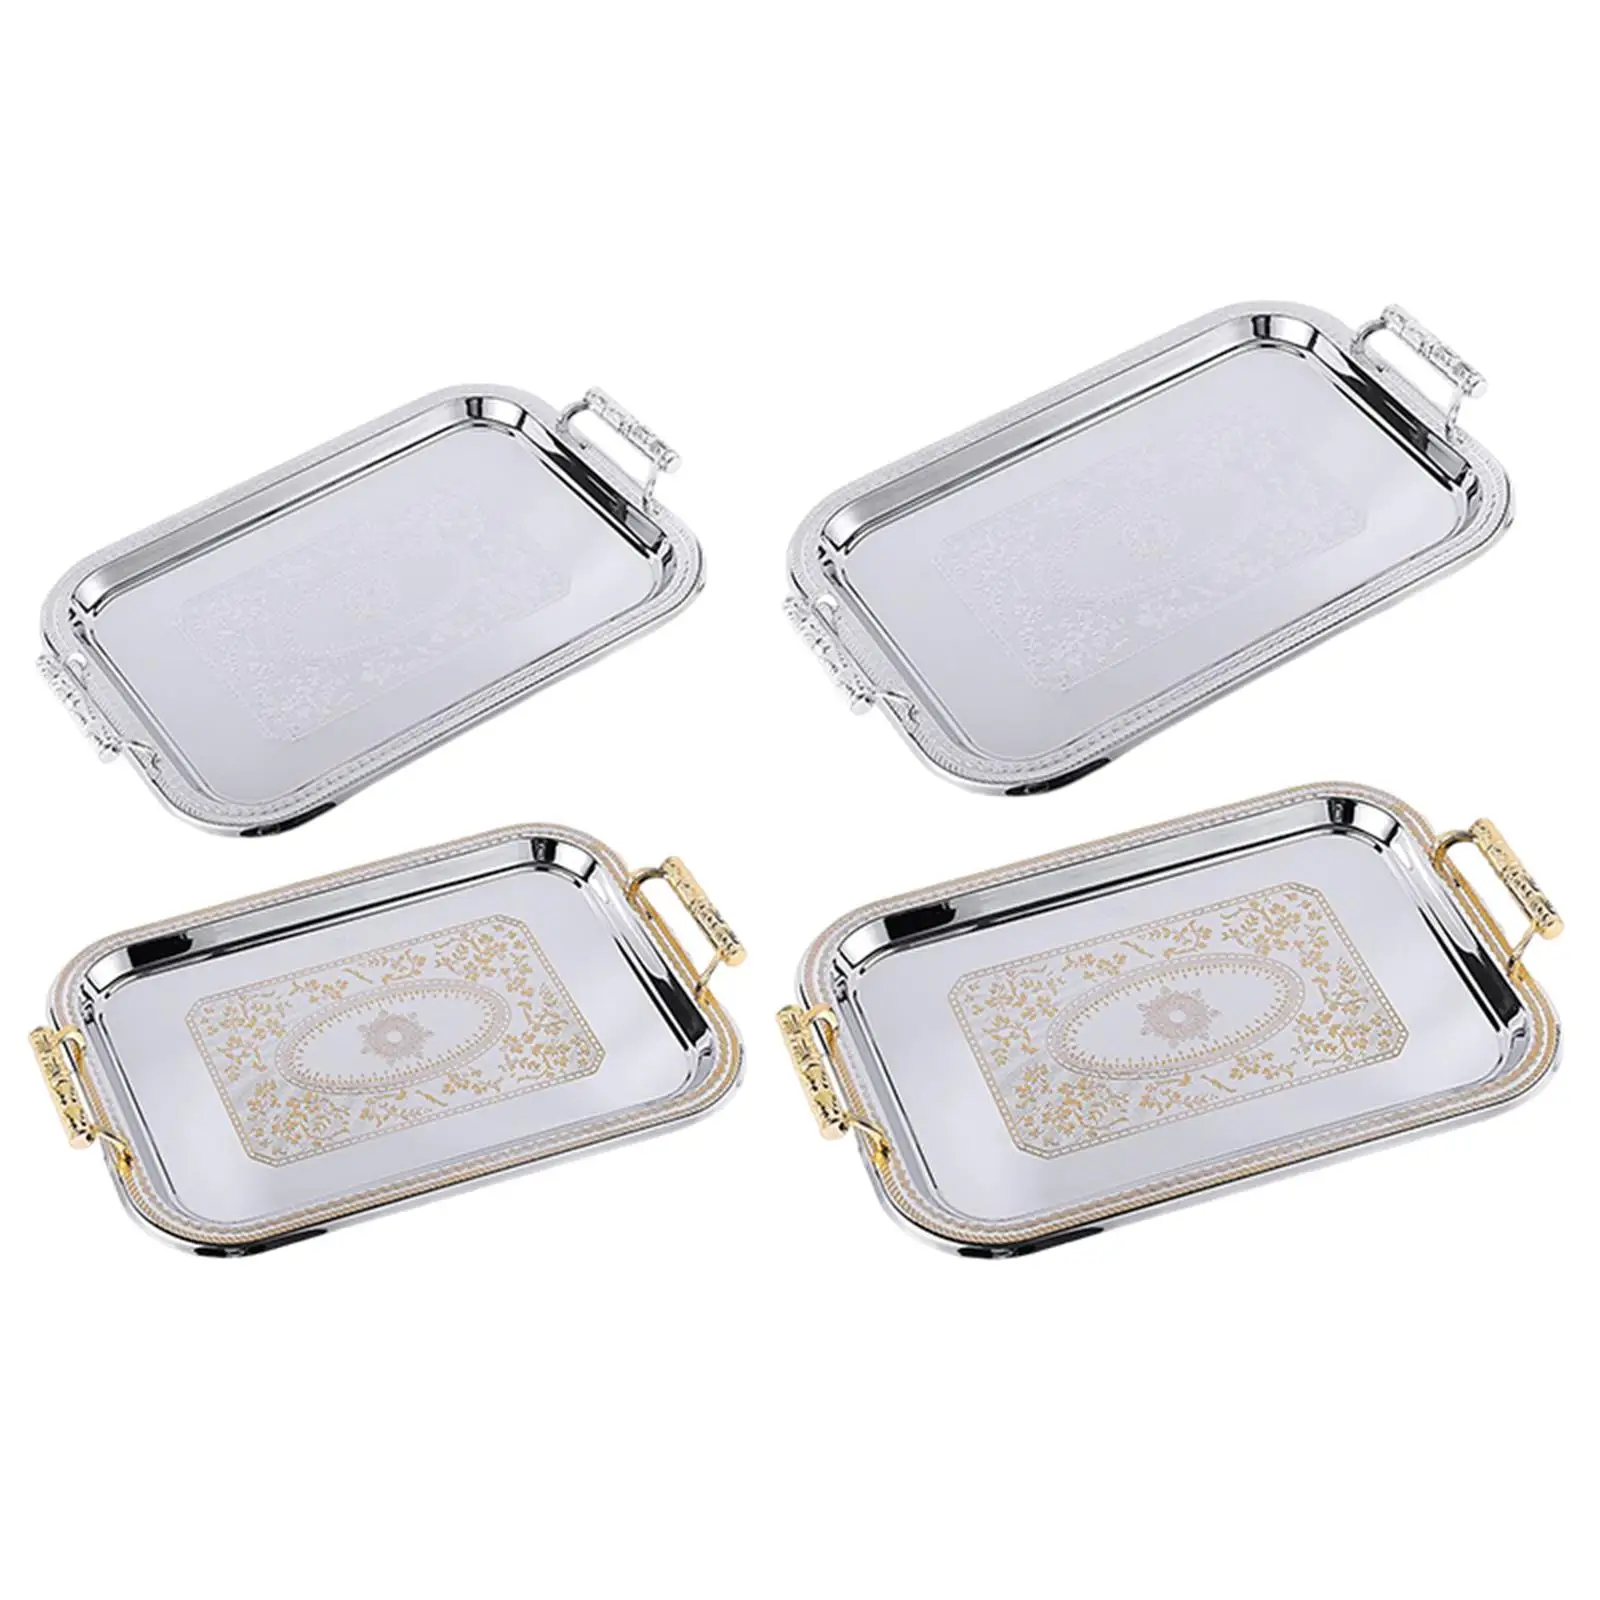 Modern Elegant Rectangle Serving Tray with Handles Decorative Tray for Living Room Restaurant Table Eating Storing Home